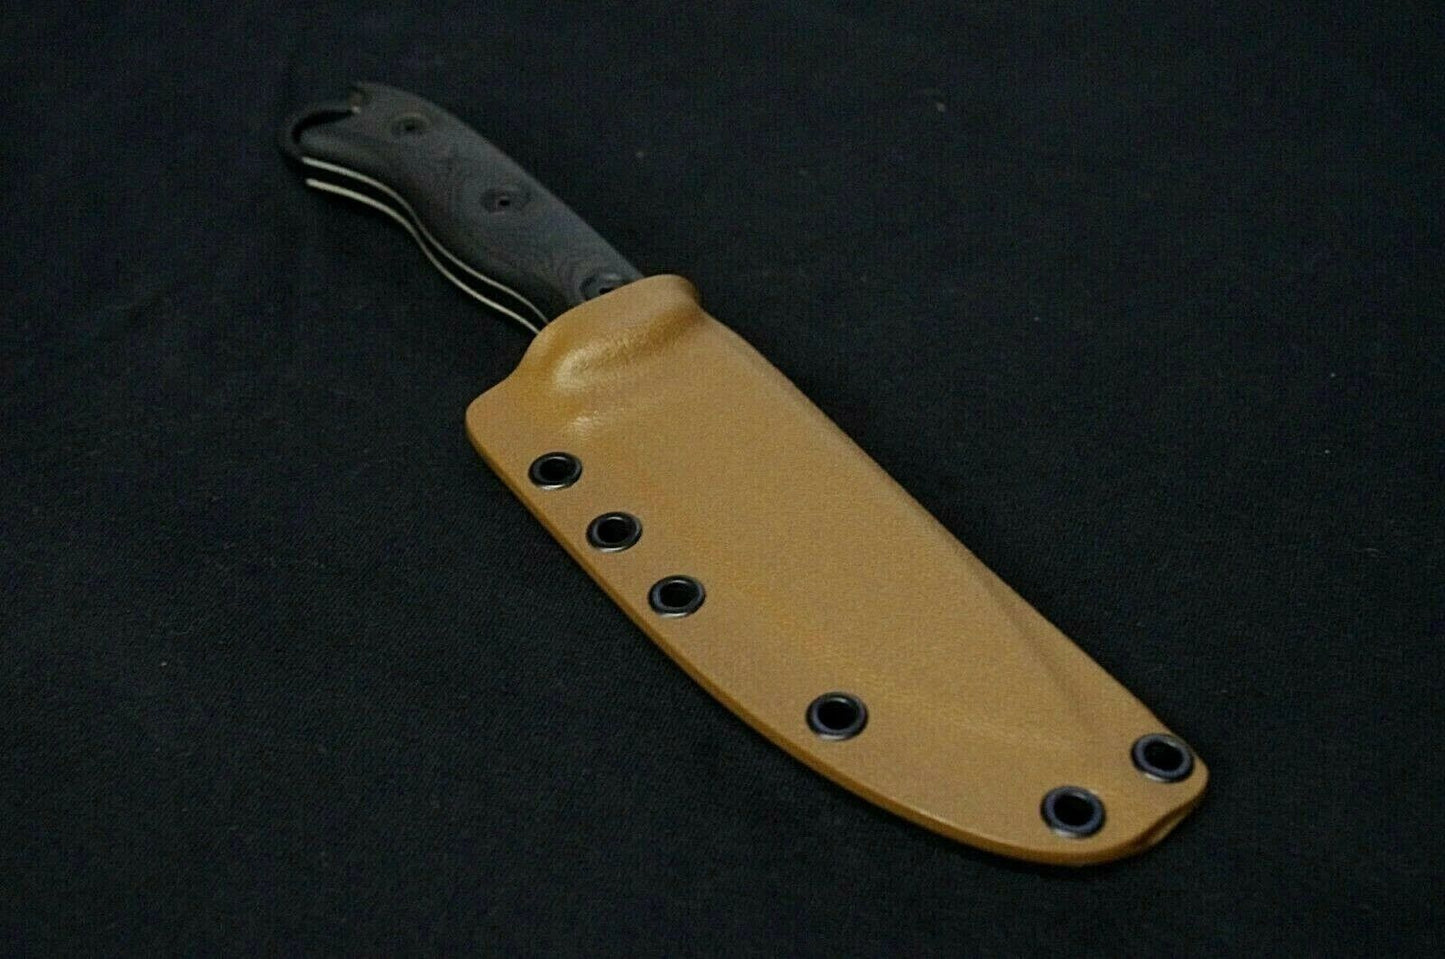 TOPS KNIVES HOG 4.5 CUSTOM KYDEX SHEATH BUILT YOUR WAY (KNIFE NOT INCLUDED)